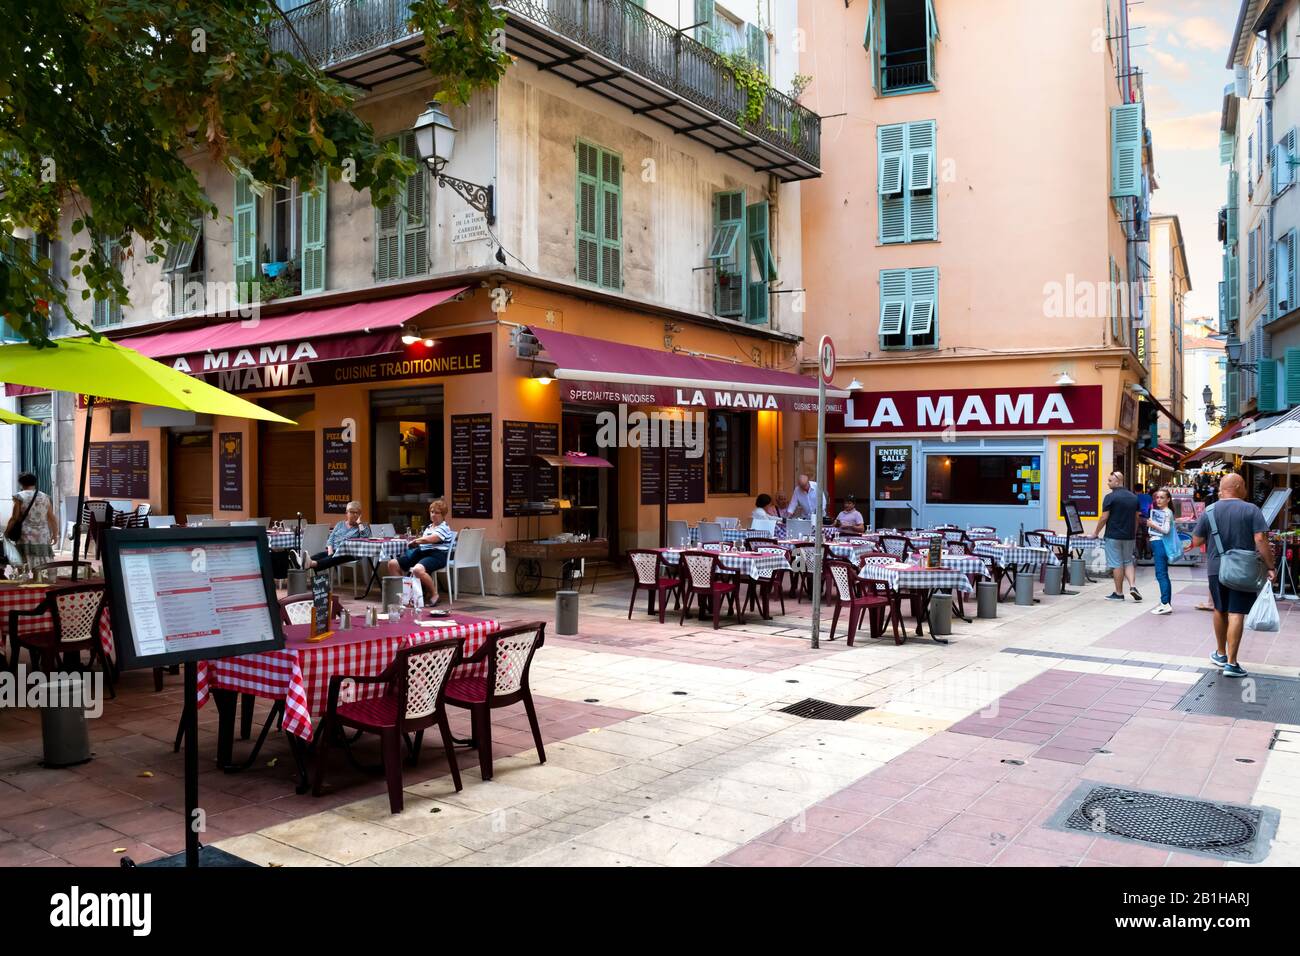 A sidewalk Italian cafe with tables on the patio in the Old Town Vieux section of Nice, France, on the French Riviera. Stock Photo